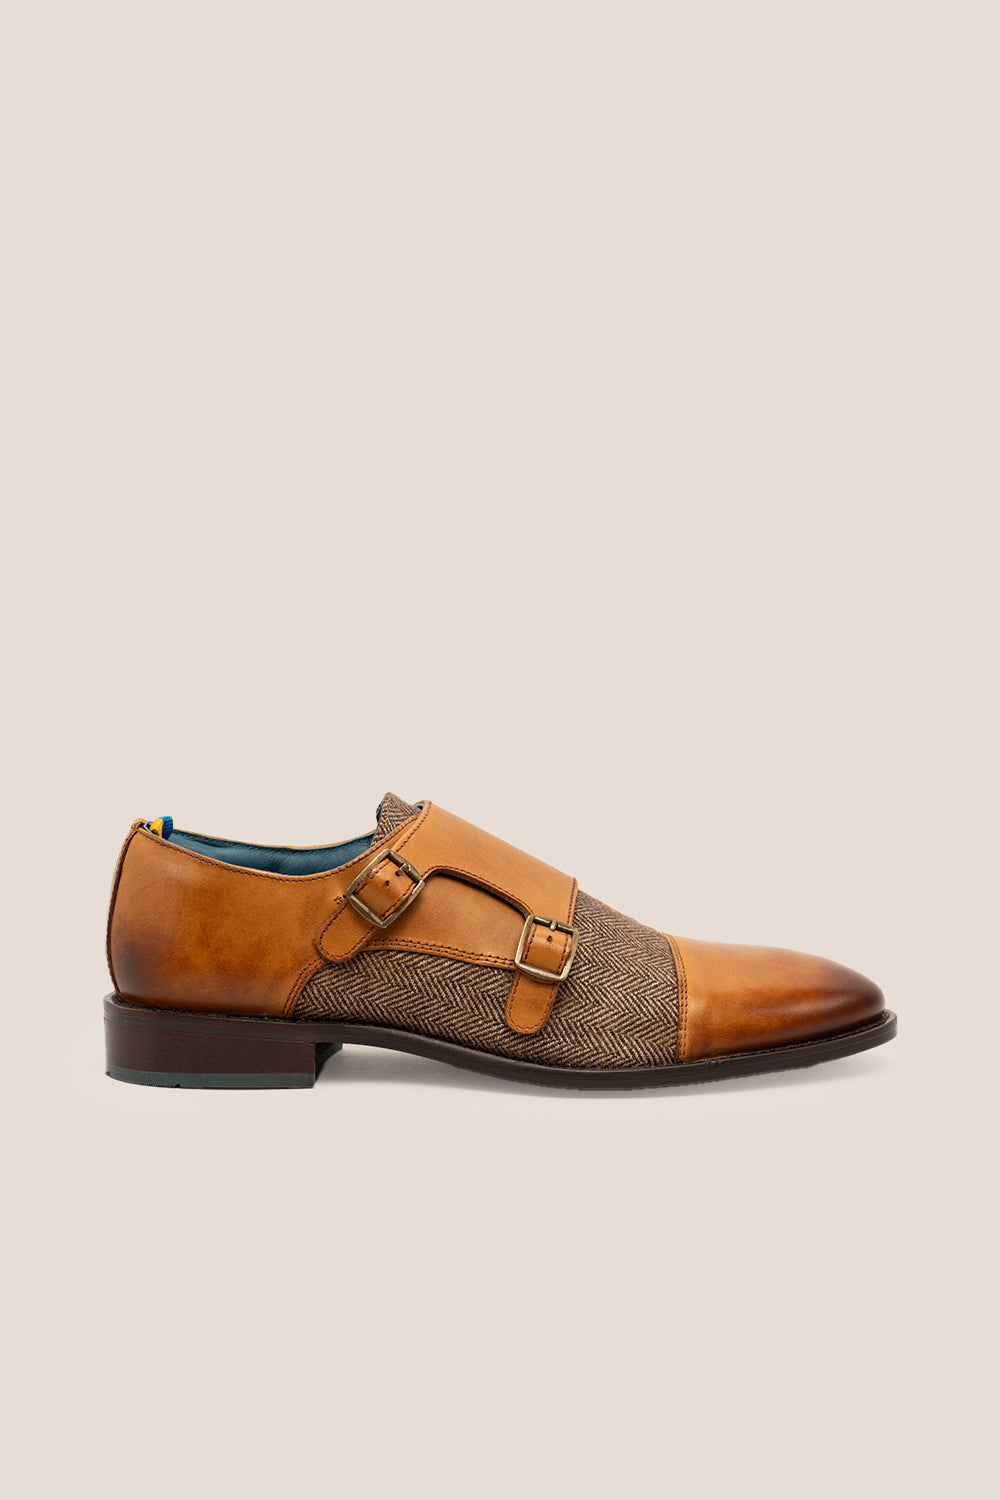 Oscar Cognac leather and tweed mens shoe Oswin Hyde